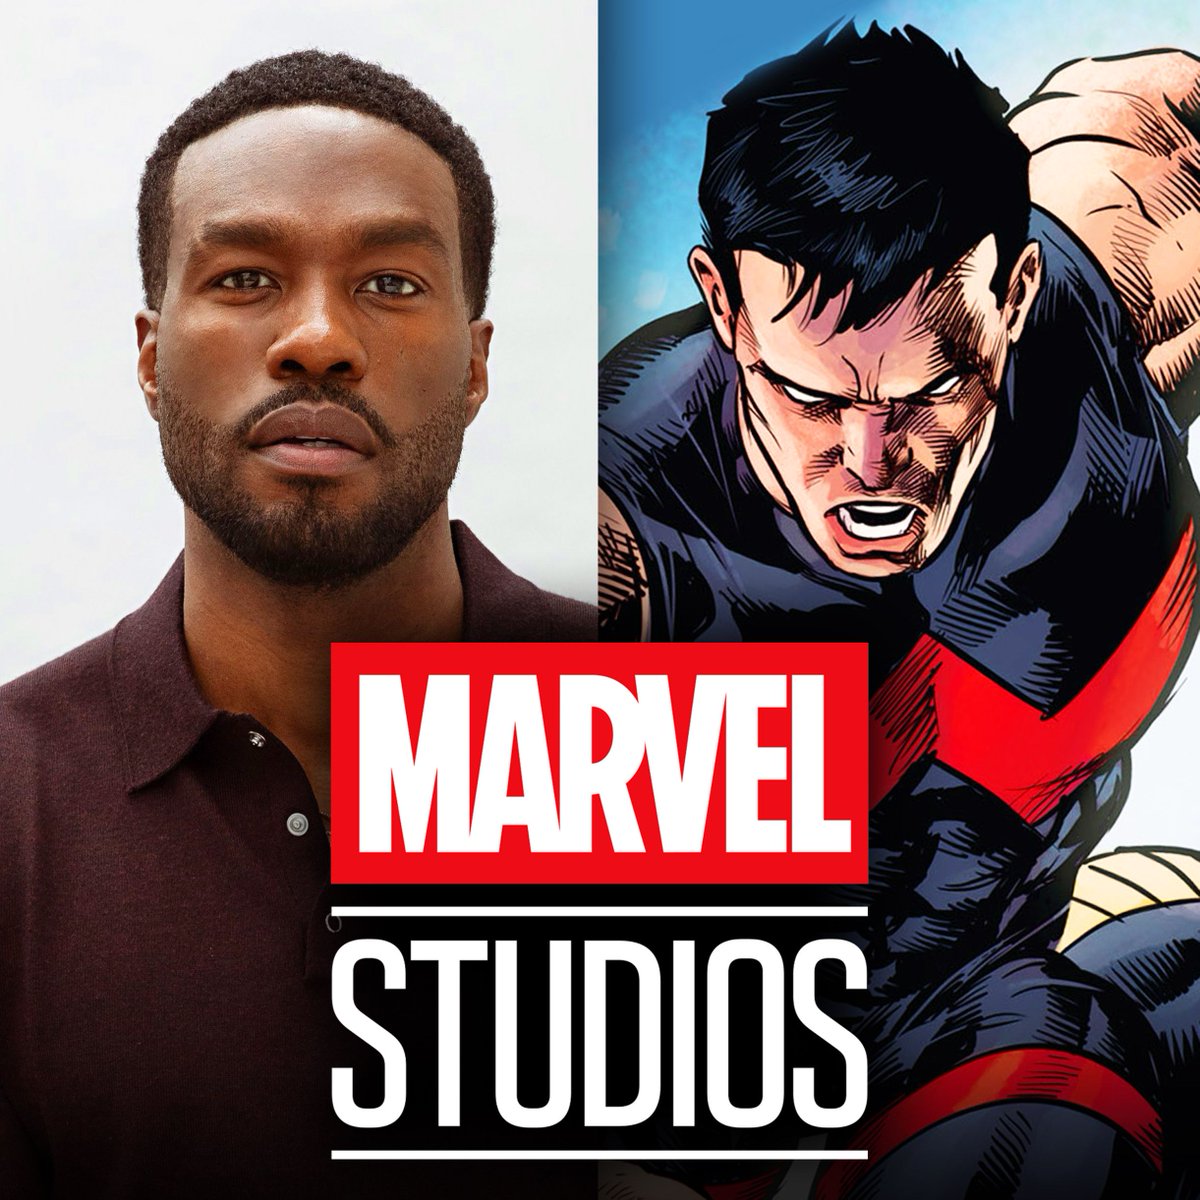 ICYMI: #MarvelStudios' WONDER MAN will reportedly be released under the 'Marvel Spotlight' banner! Details: thedirect.com/article/marvel…